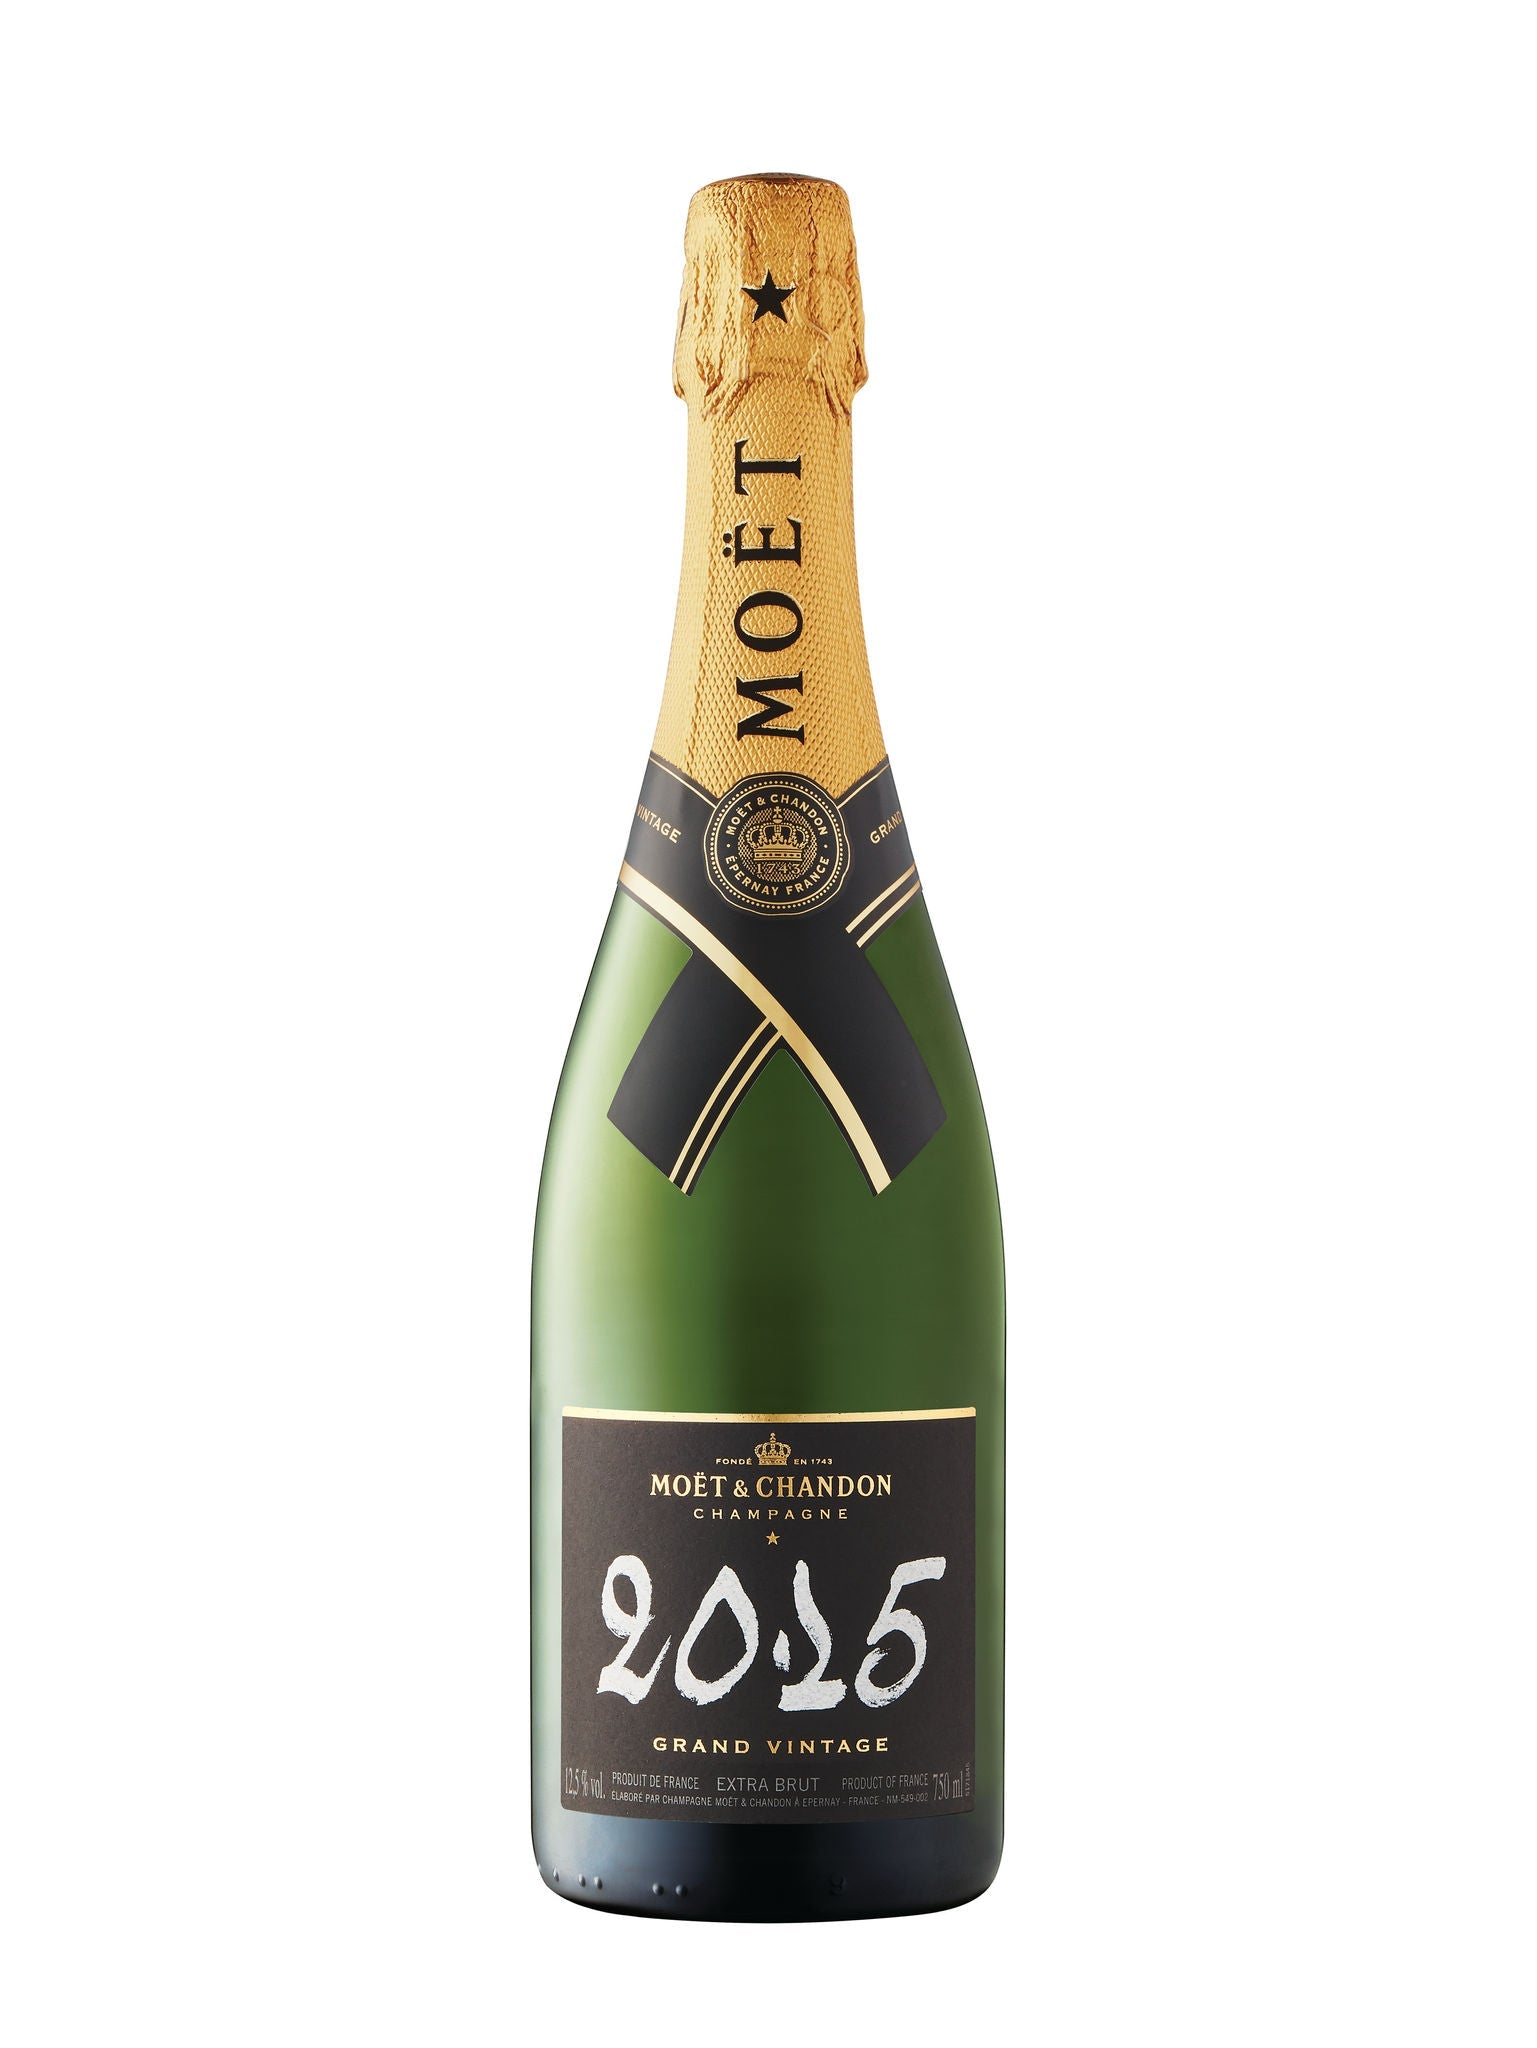 Moët & Chandon Grand Vintage Extra Brut Champagne 2015 | Exquisite Wine & Alcohol Gift Delivery Toronto Canada | Vyno